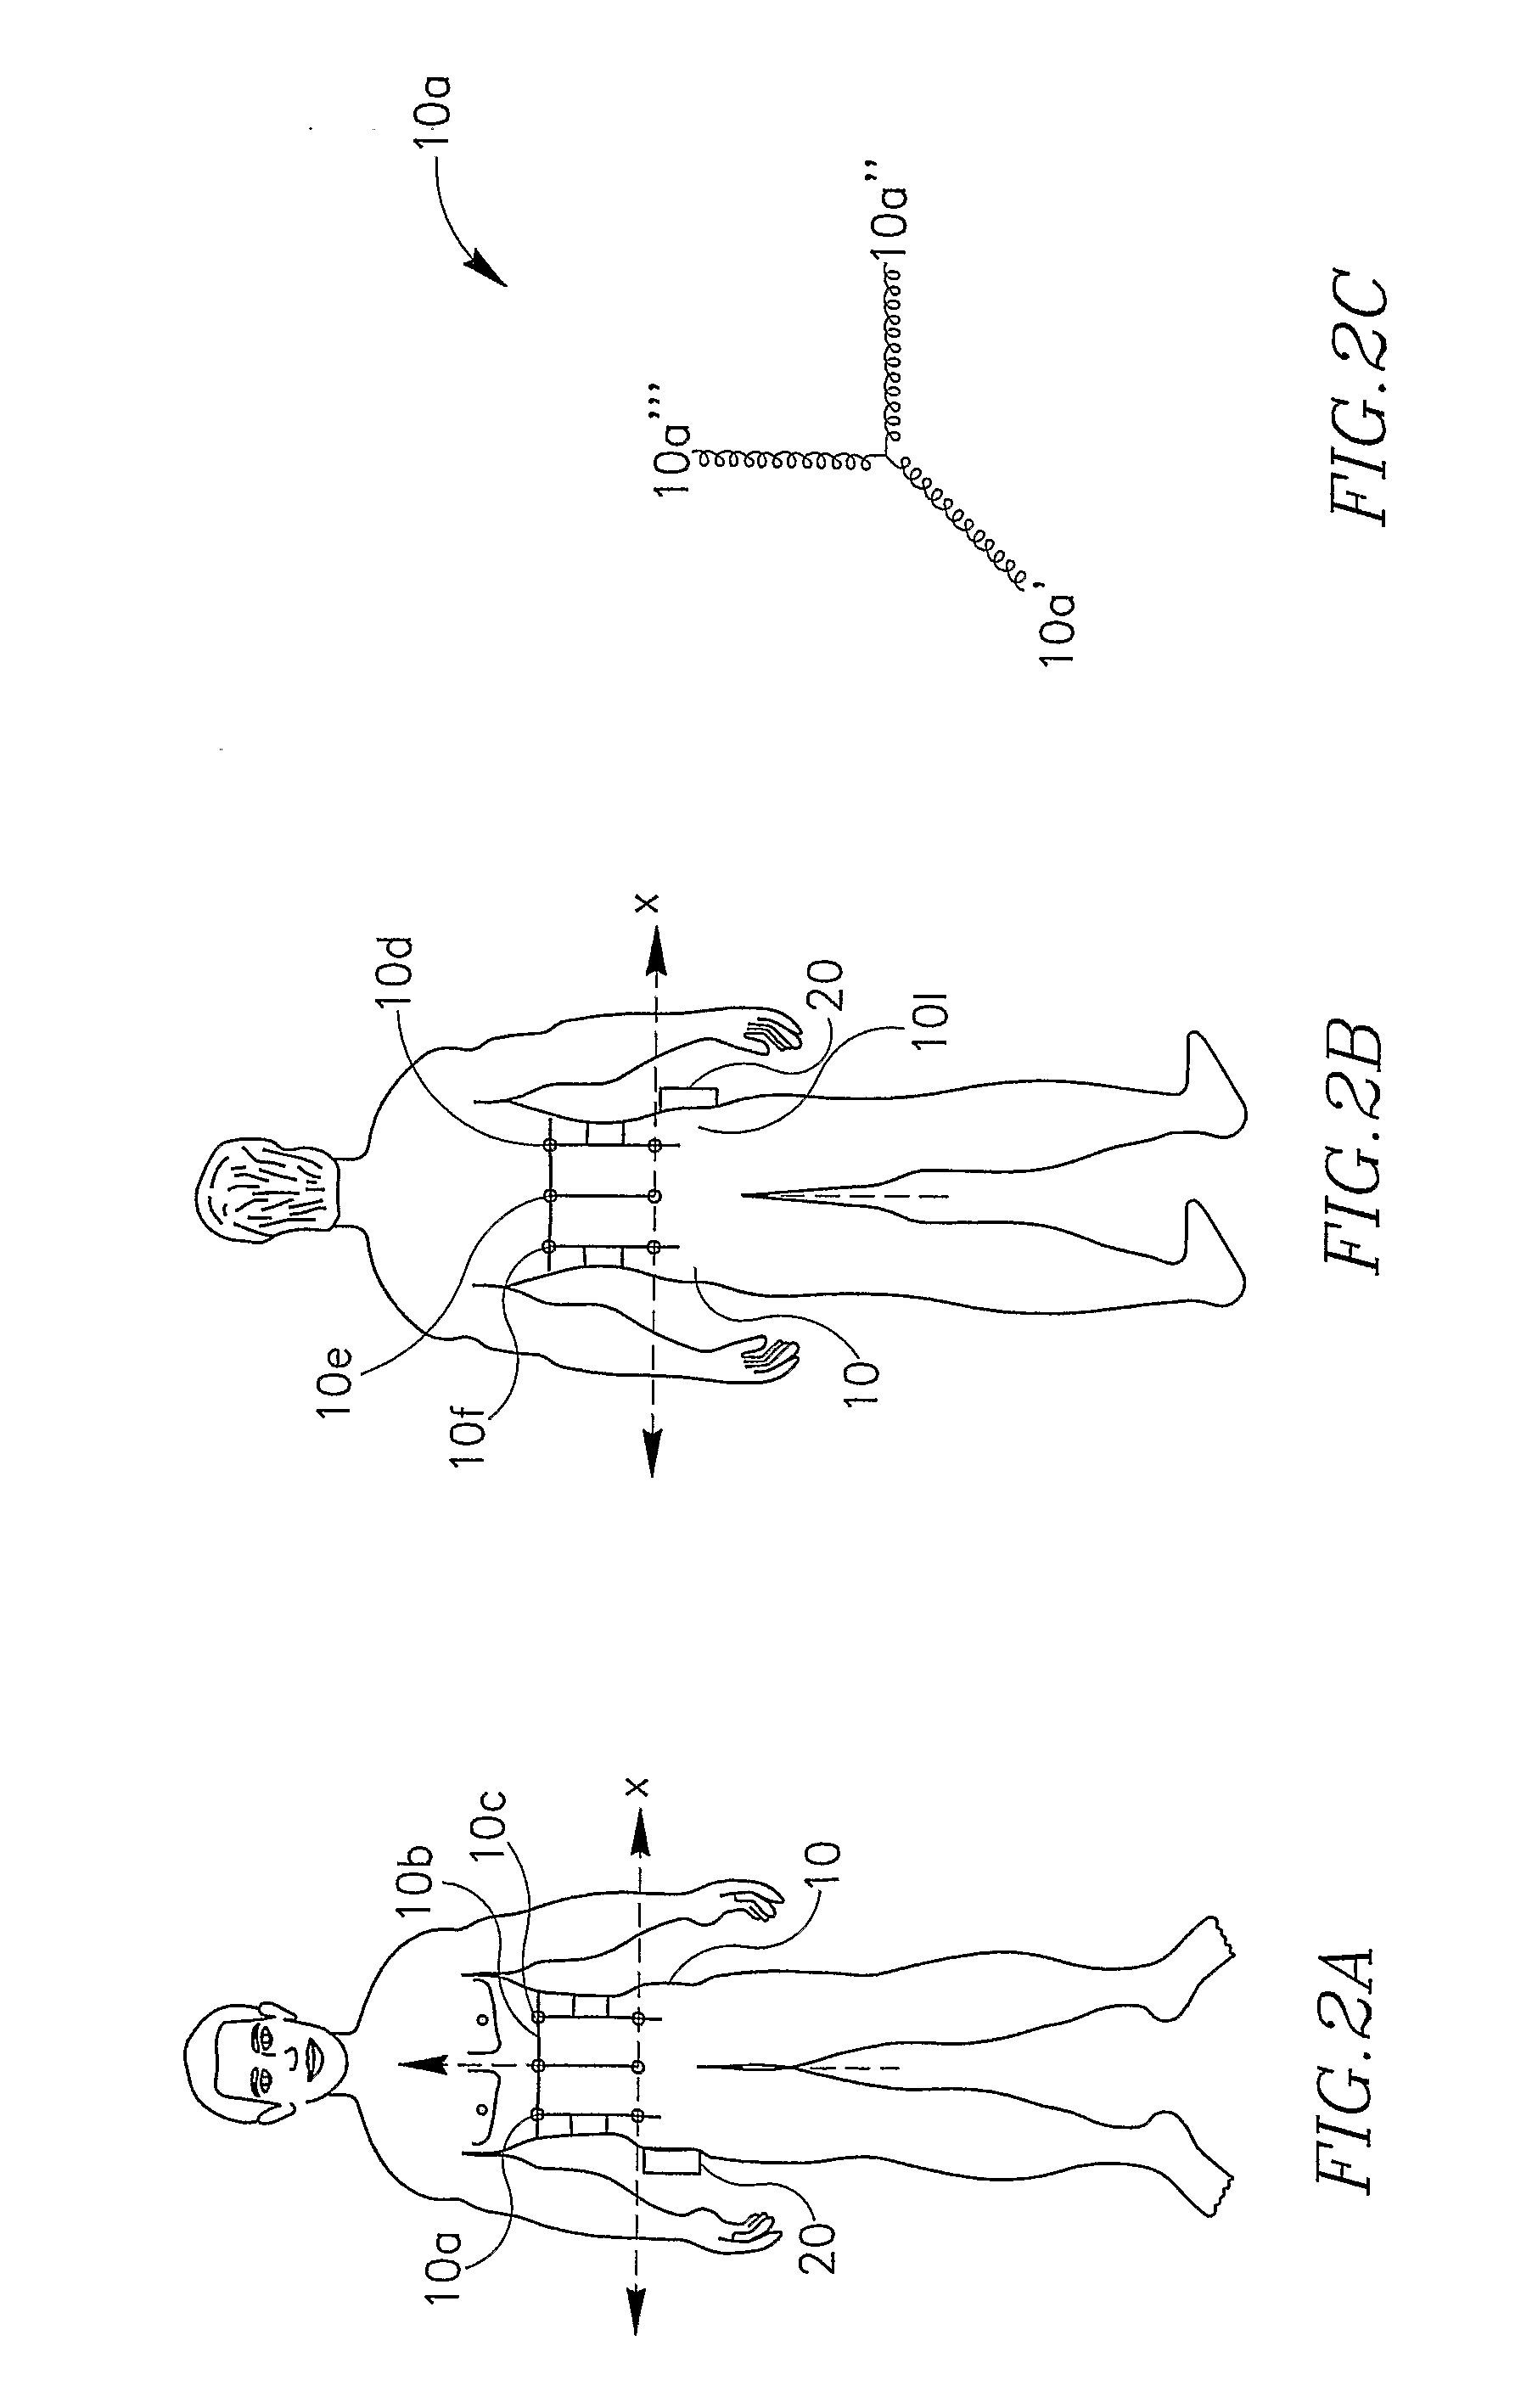 System and method of in-vivo magnetic position determination